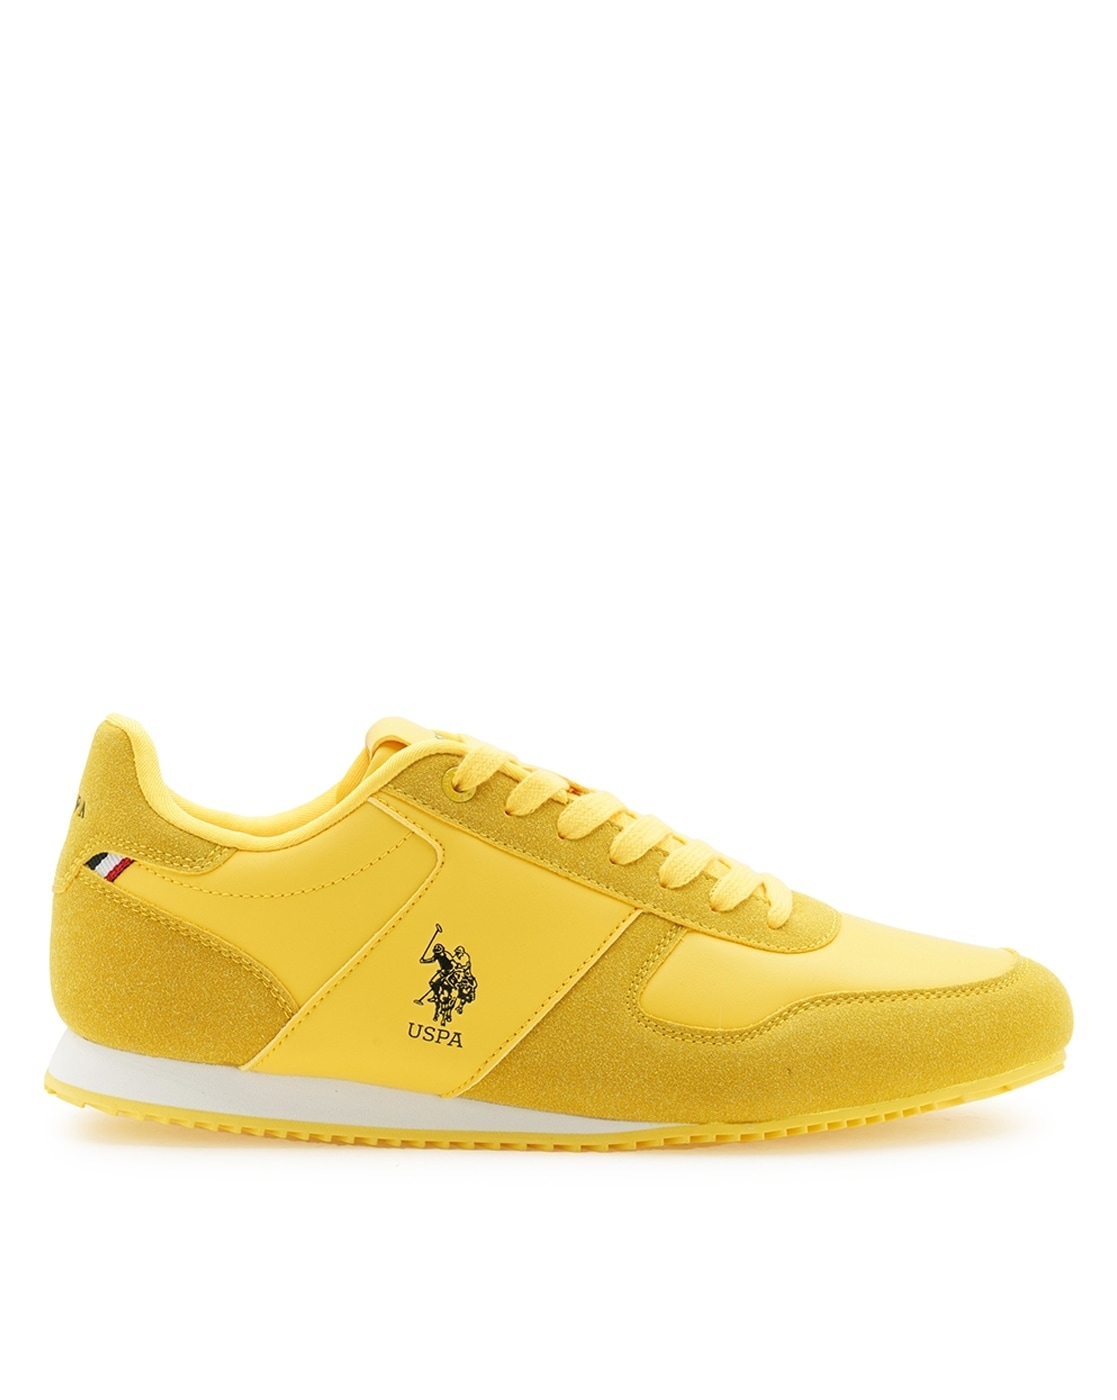 How to Wear Yellow Shoes - Yellow Shoes Outfits for Men and Women | Yellow  shoes outfit, Sneaker outfits women, Outfits